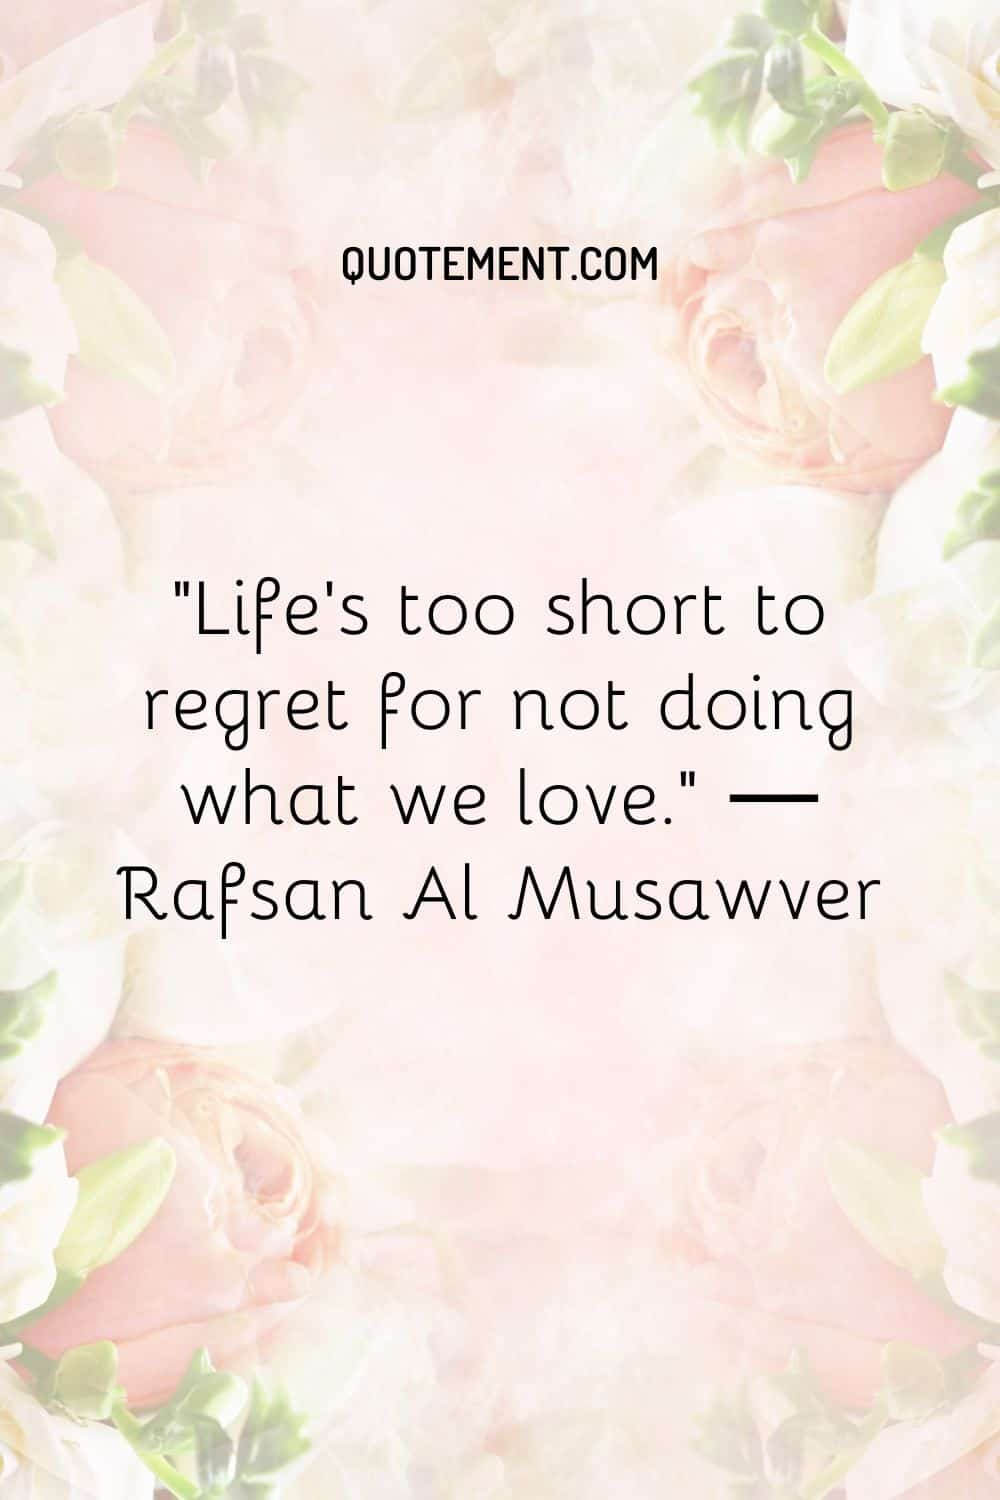 Life’s too short to regret for not doing what we love